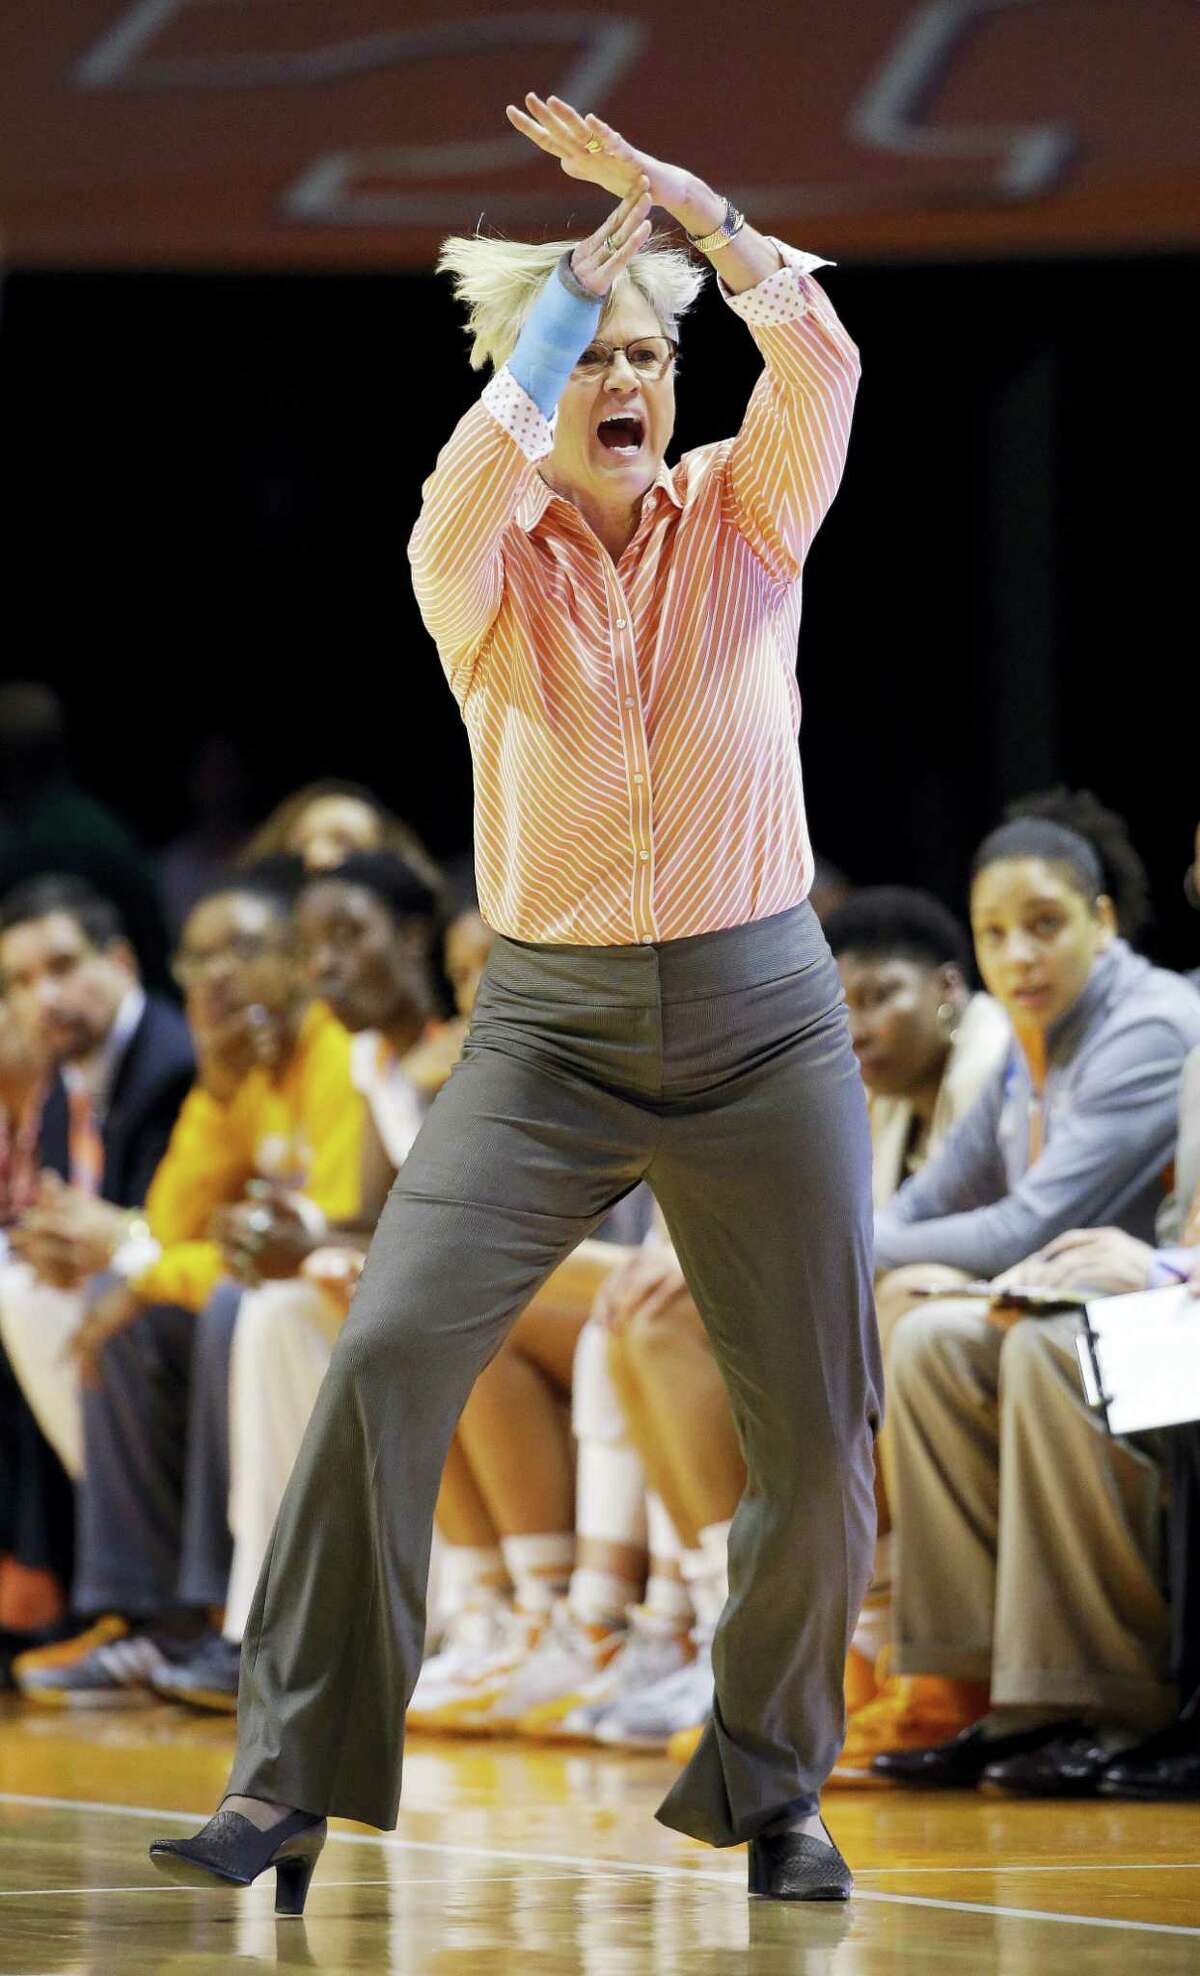 In this March 21, 2015 photo, Tennessee head coach Holly Warlick calls for a timeout in the first half of an NCAA women’s college basketball tournament game against Boise State, in Knoxville, Tenn. The NCAA has altered a rule put into place last season that took away a coach’s ability to call a timeout in live-ball situations. The new variance will allow them to call timeouts now, but only when the team is trying to inbound the ball.